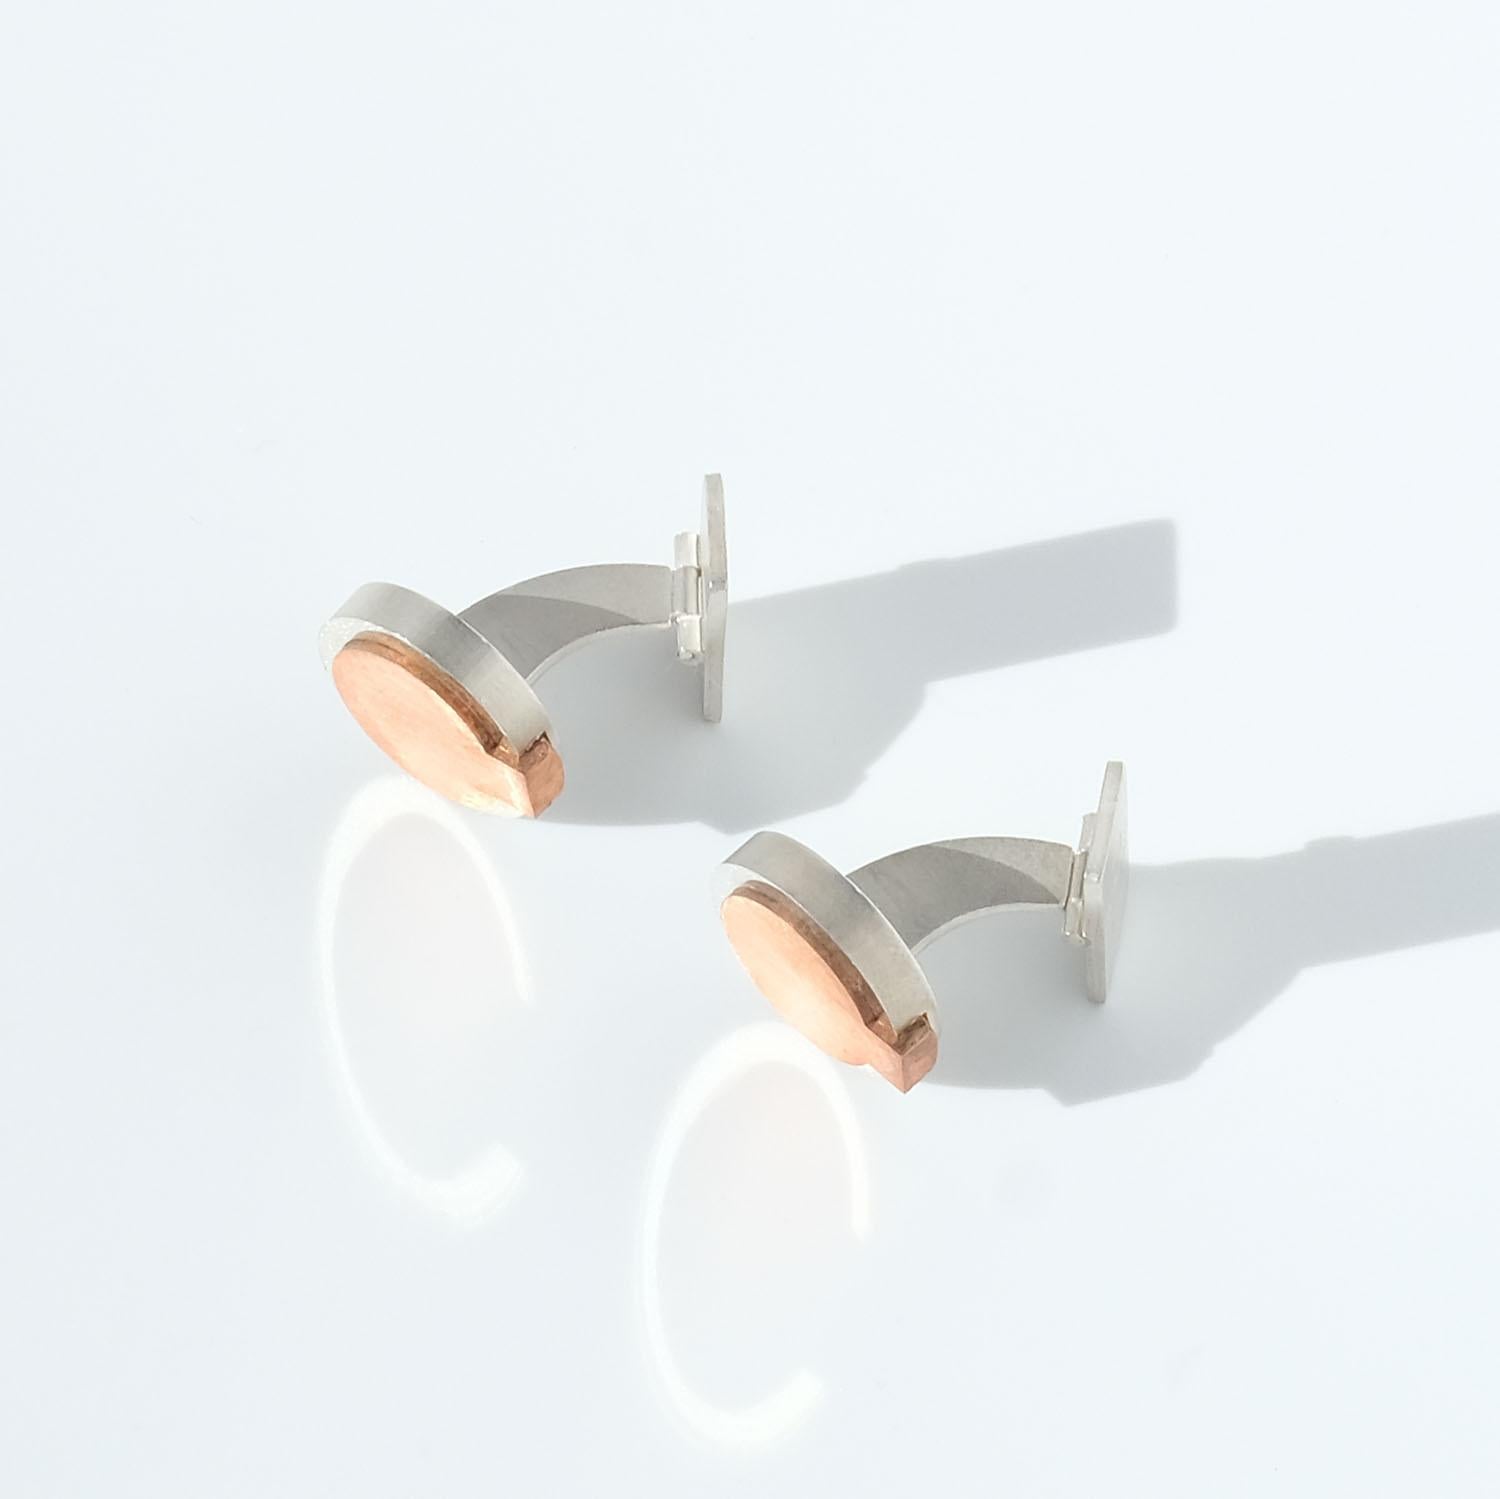 These cufflinks are made out of sterling silver and copper. They have a circular shape and a matte, brushed surface.

A pair of cufflinks like this is suitable for both everyday wear as well as any festive occasion.

The cufflinks were made in 1987